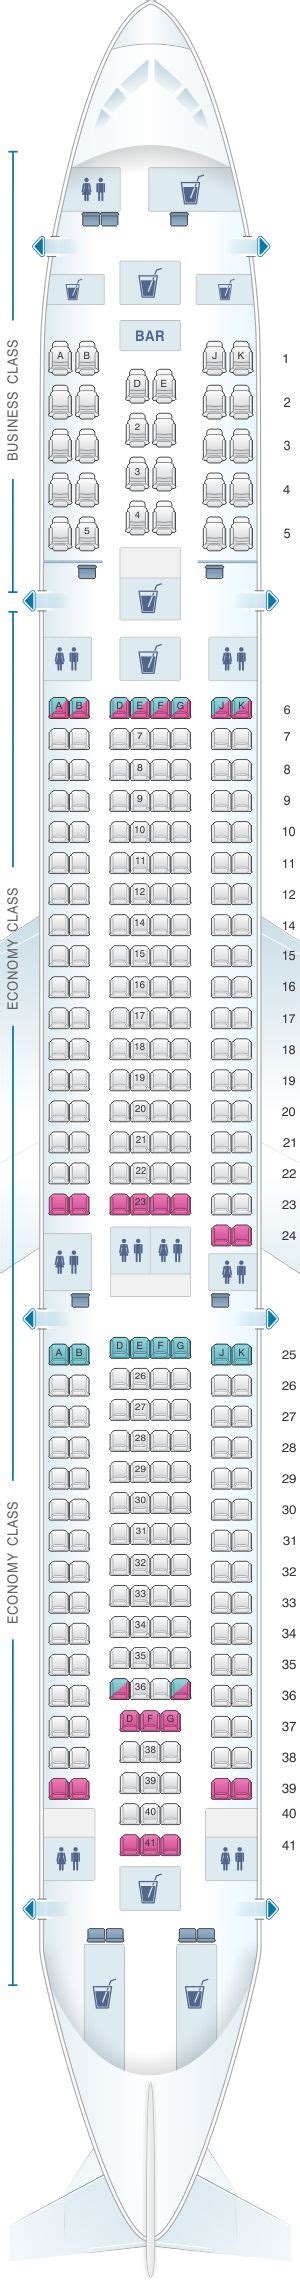 Seat Map Turkish Airlines Airbus A Hainan Airlines Srilankan